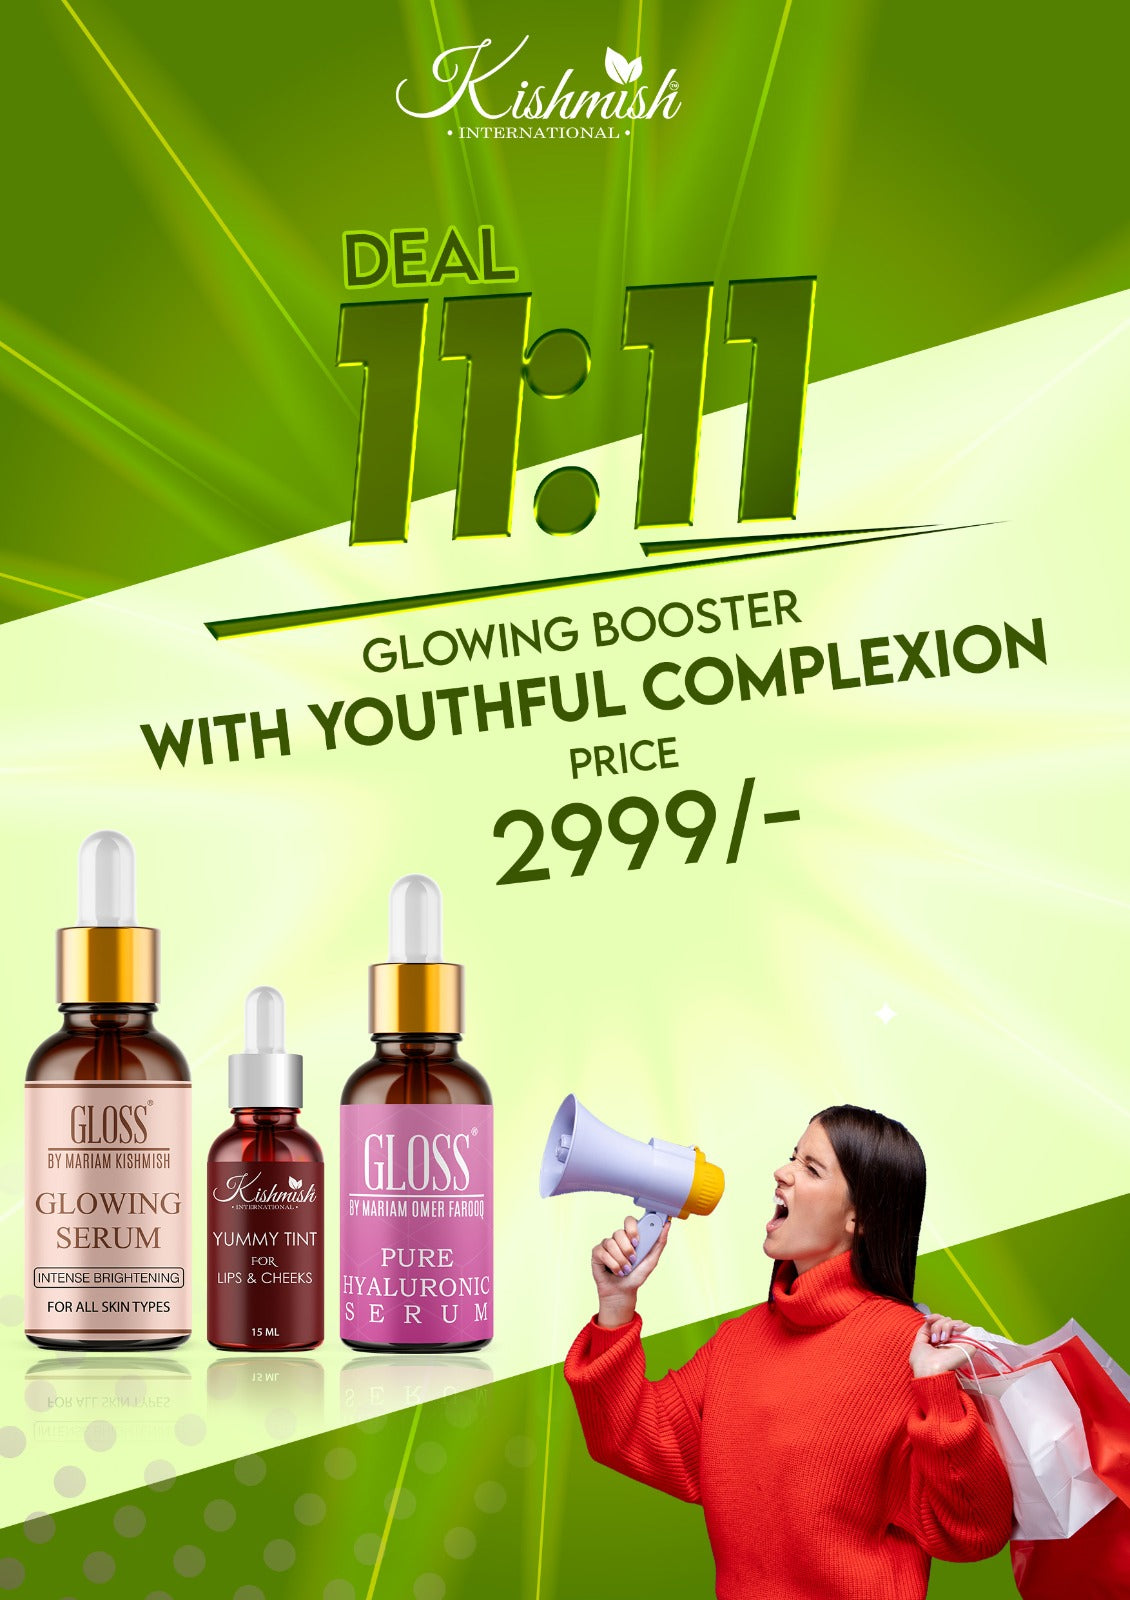 Glowing Serum + Tint + HA Serum ~ Glowing Booster with Youthful Complexion